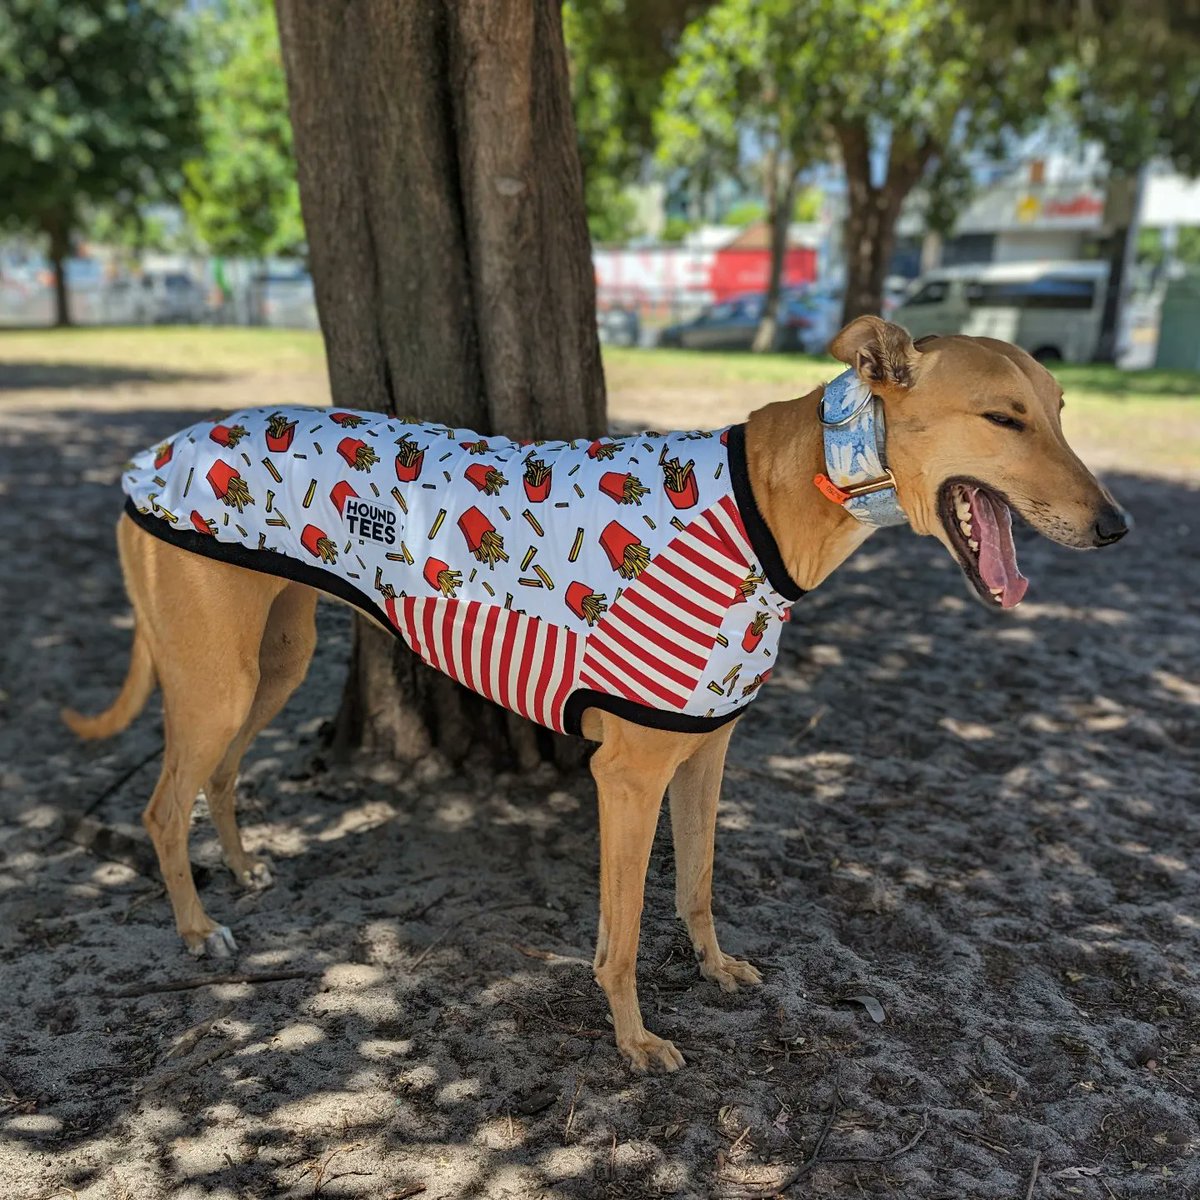 Chip fiend Noodle in one of her new Houndtees